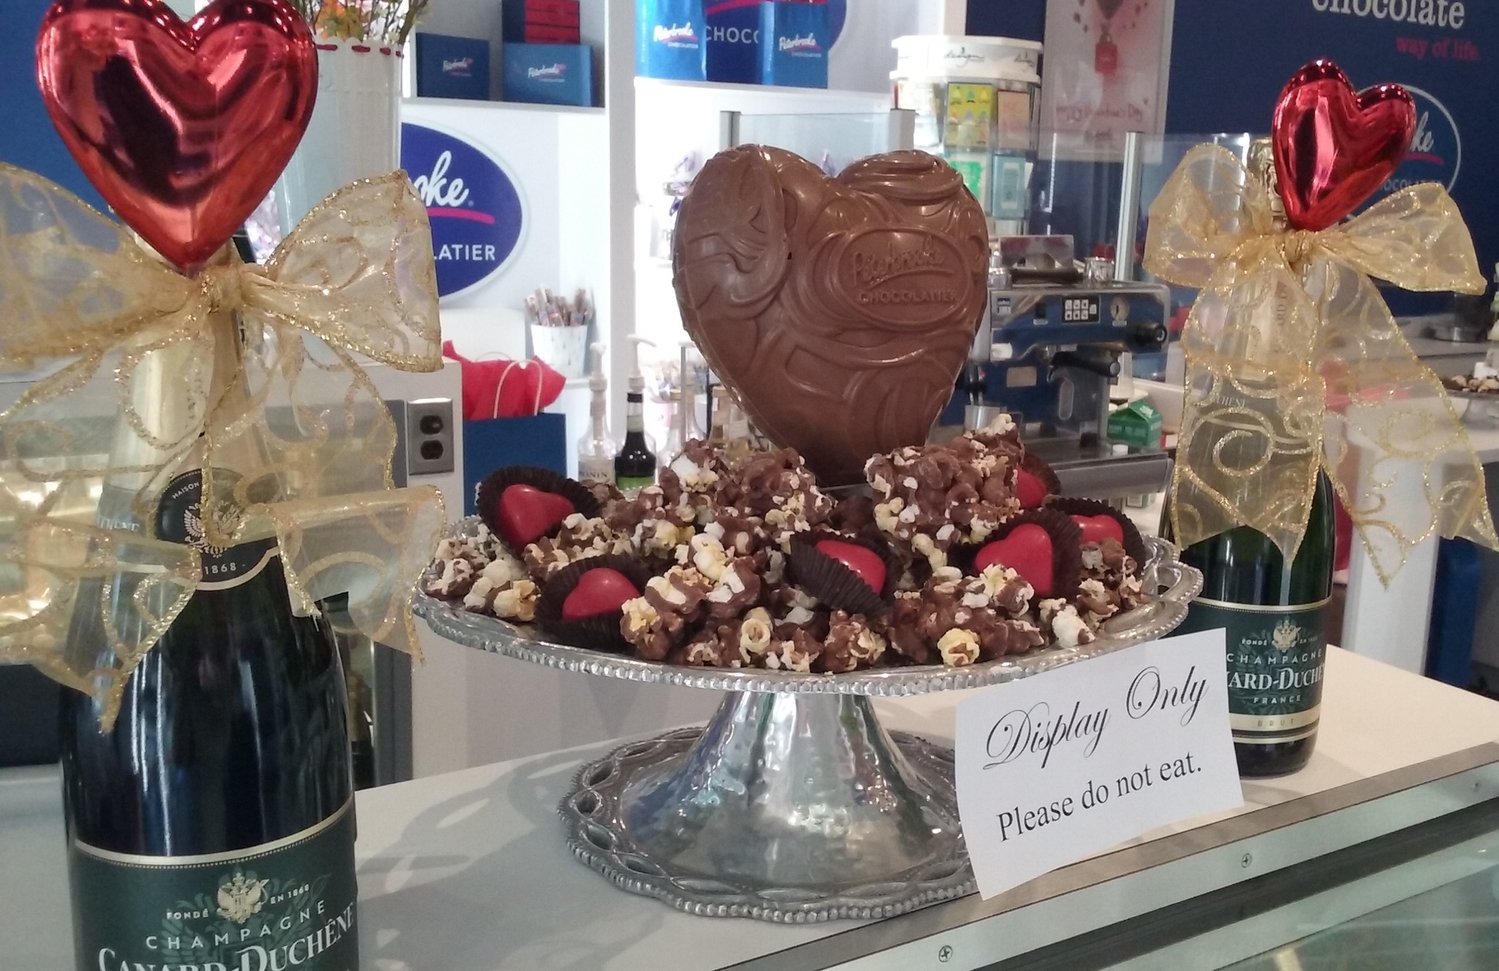 Valentine’s Day is the biggest day of the year at Peterbrooke Chocolatier, where sweet selections add to the romance of the holiday.